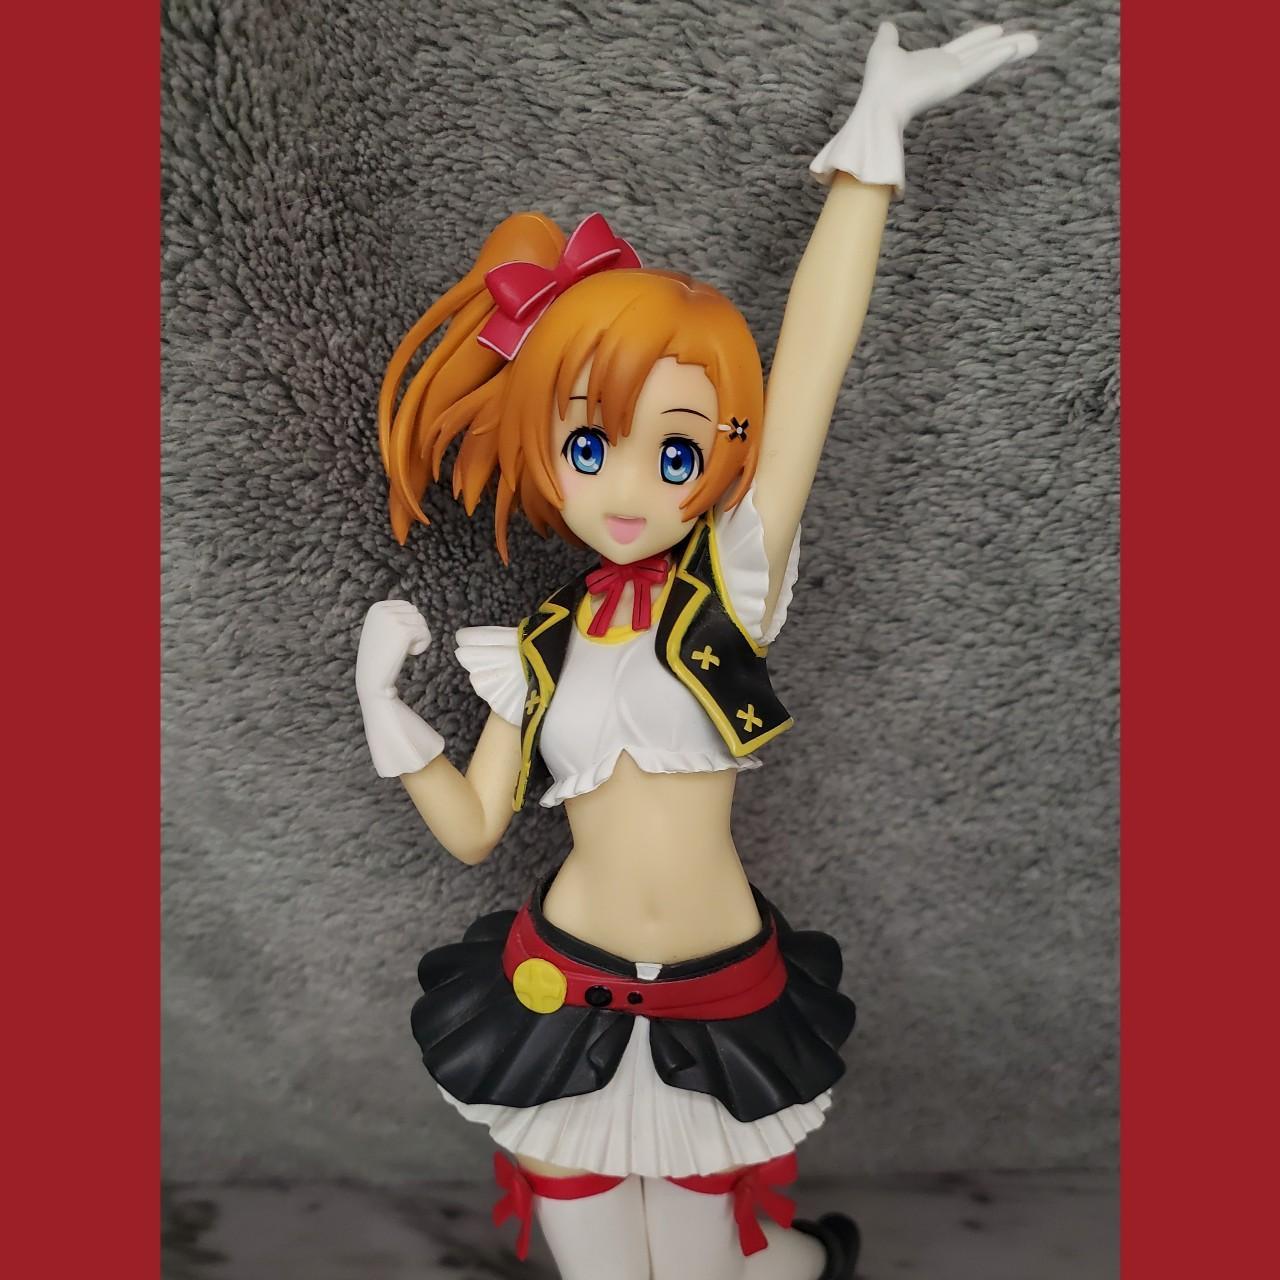 New 25CM The fox Girl Anime Figures Pvc Toy Collect toy gift No box | eBay